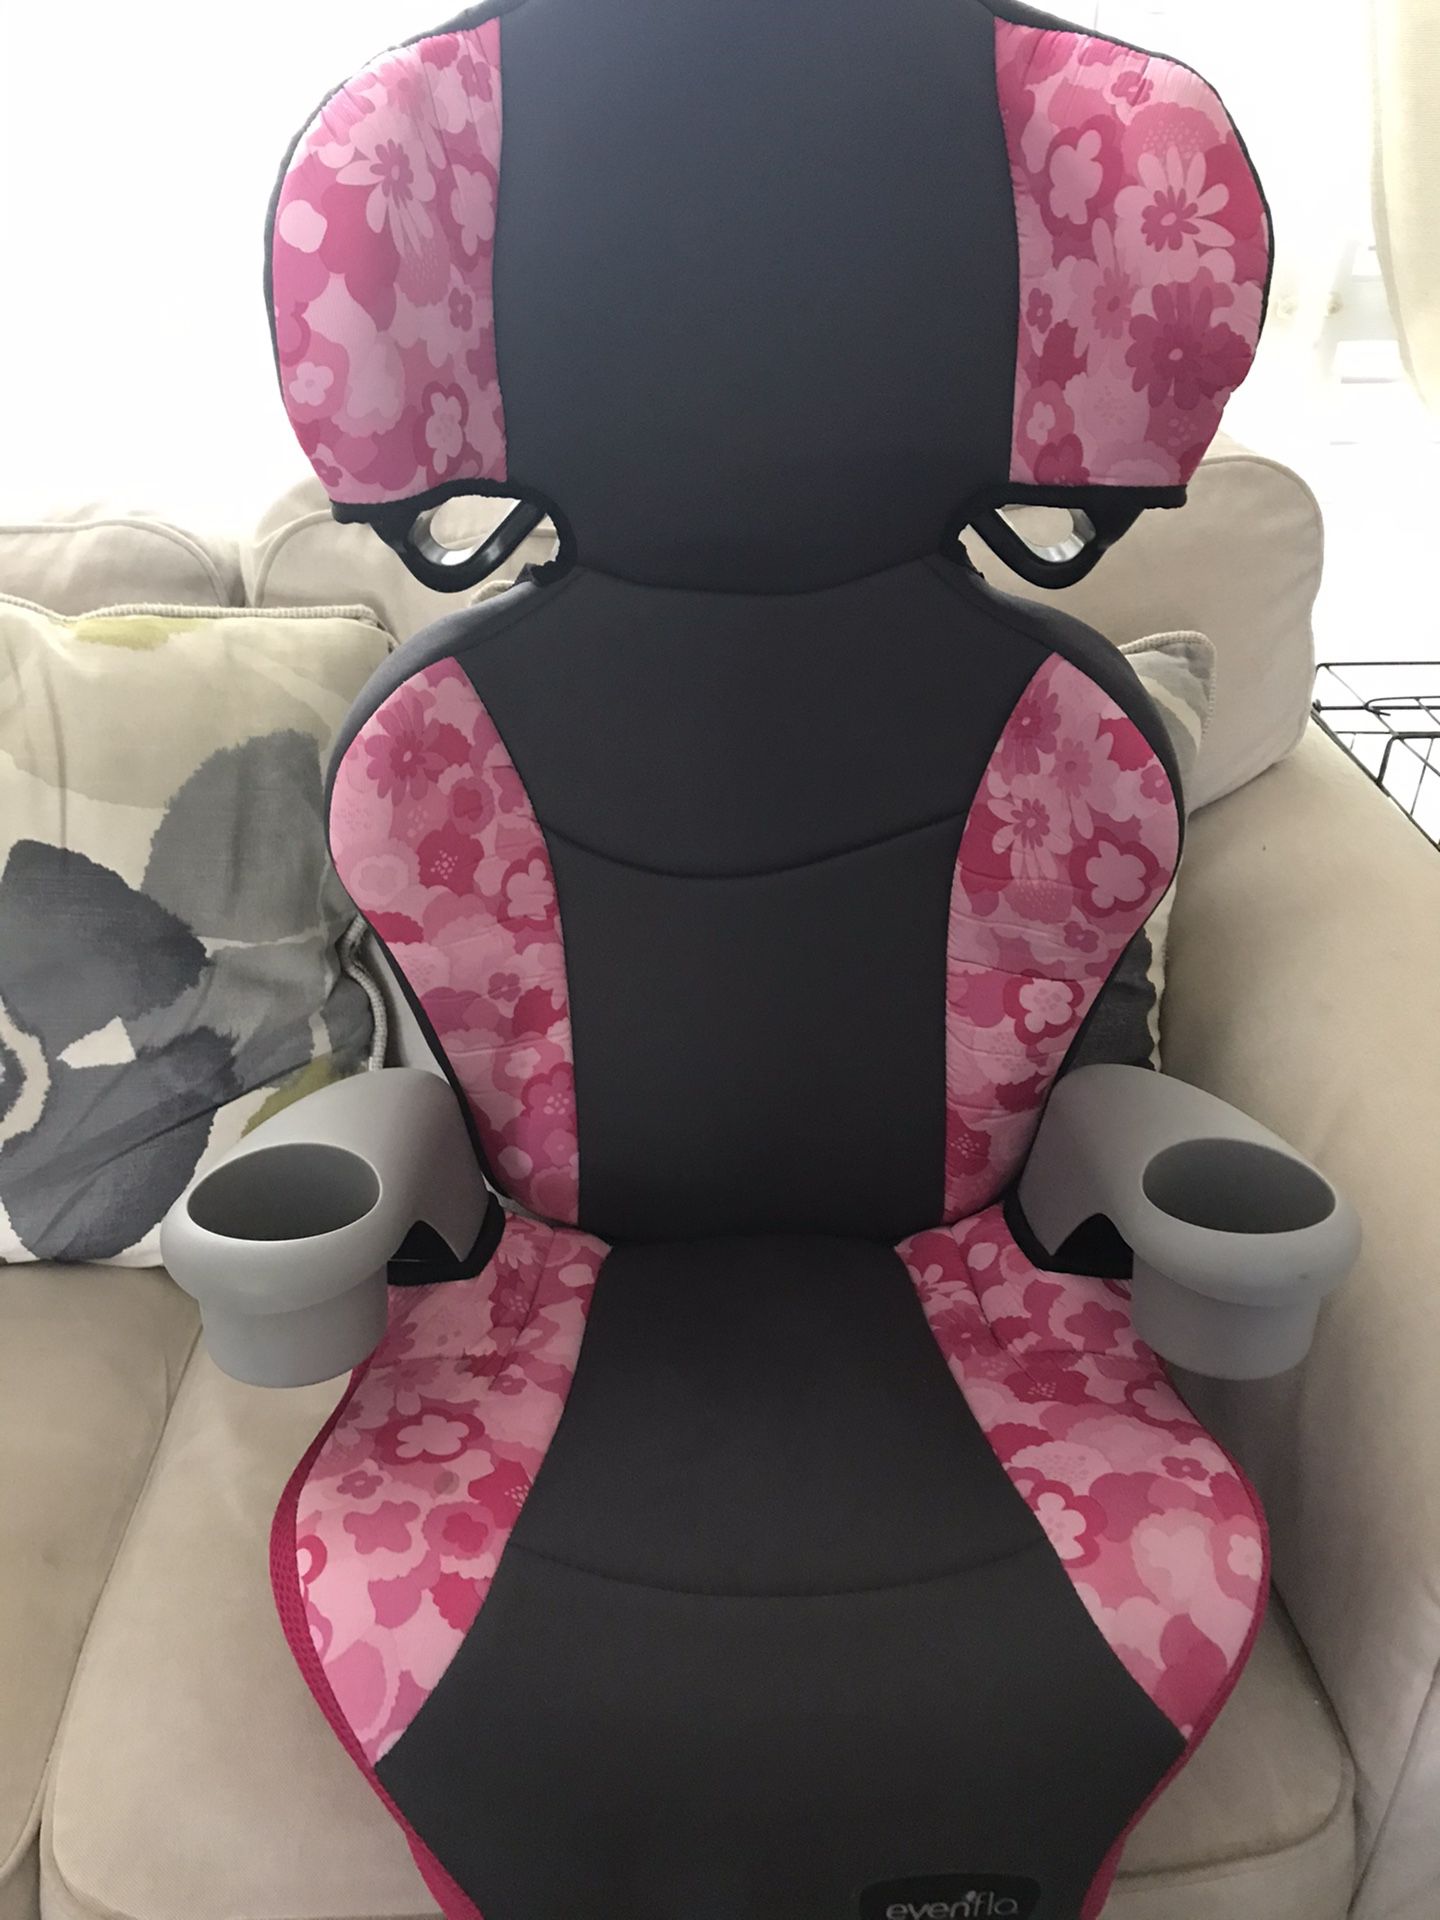 Evenflo girls booster seat